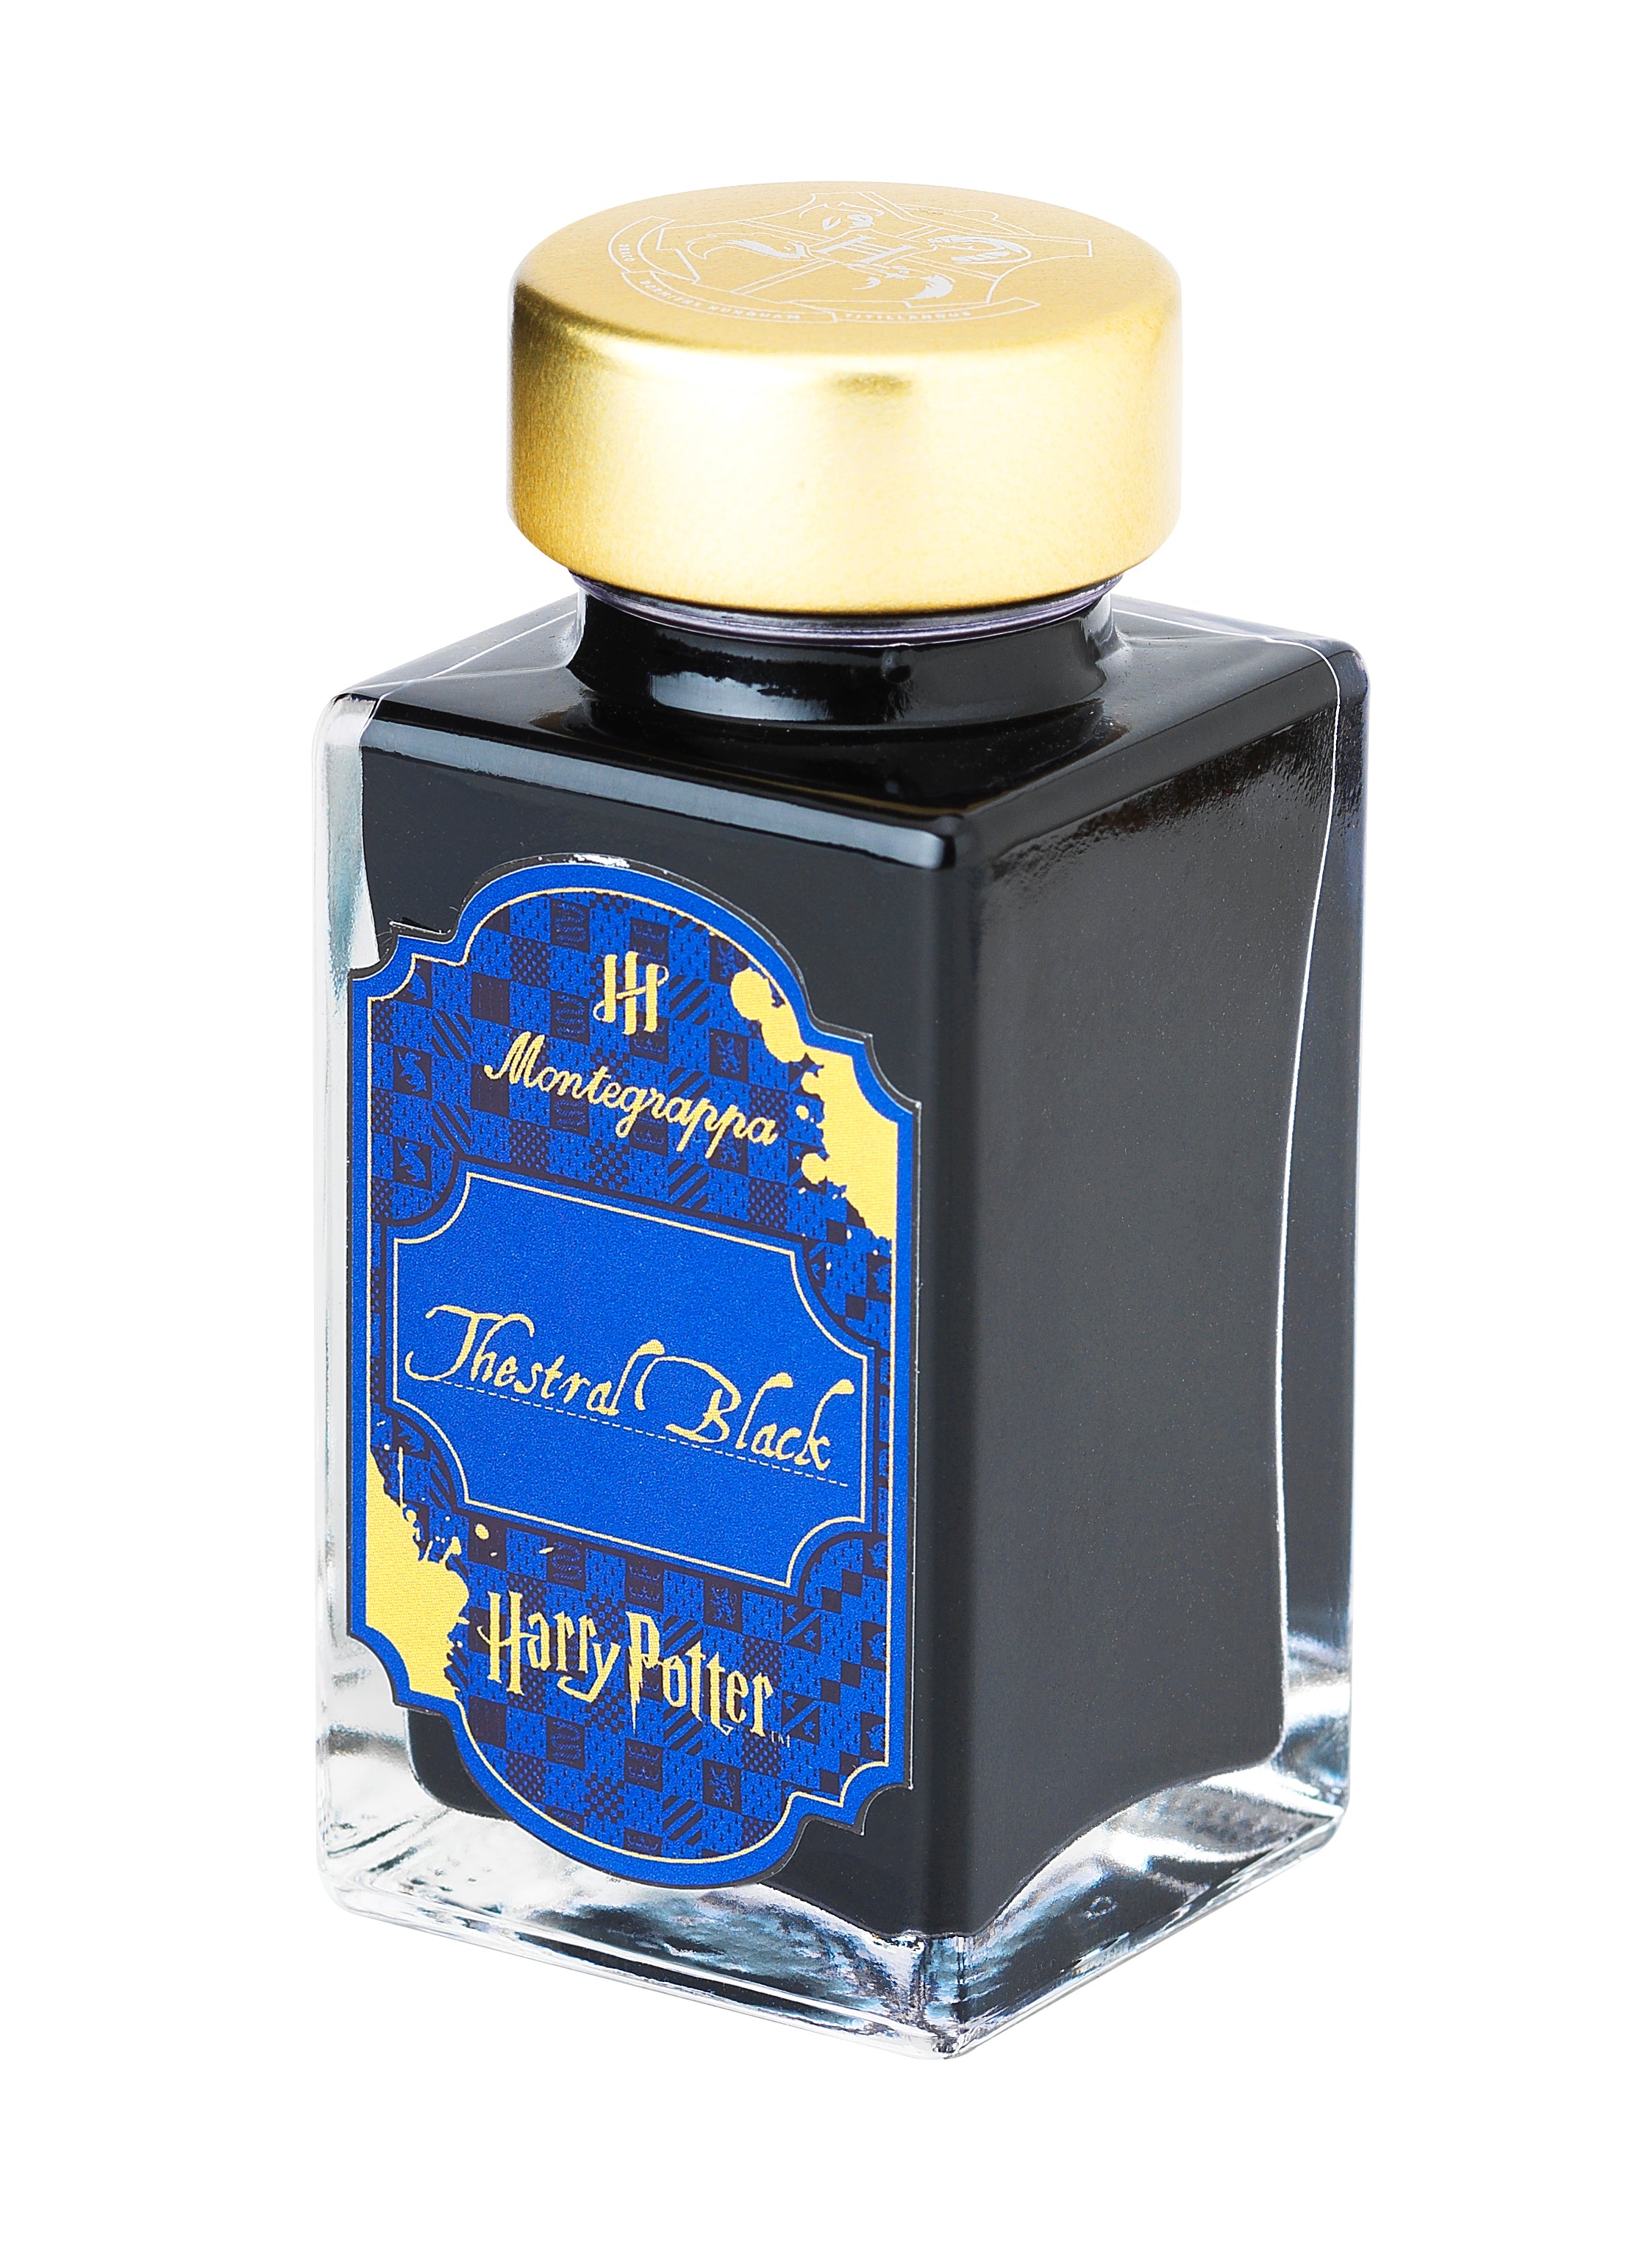 Montegrappa - Harry Potter Tinte, Thestral Black